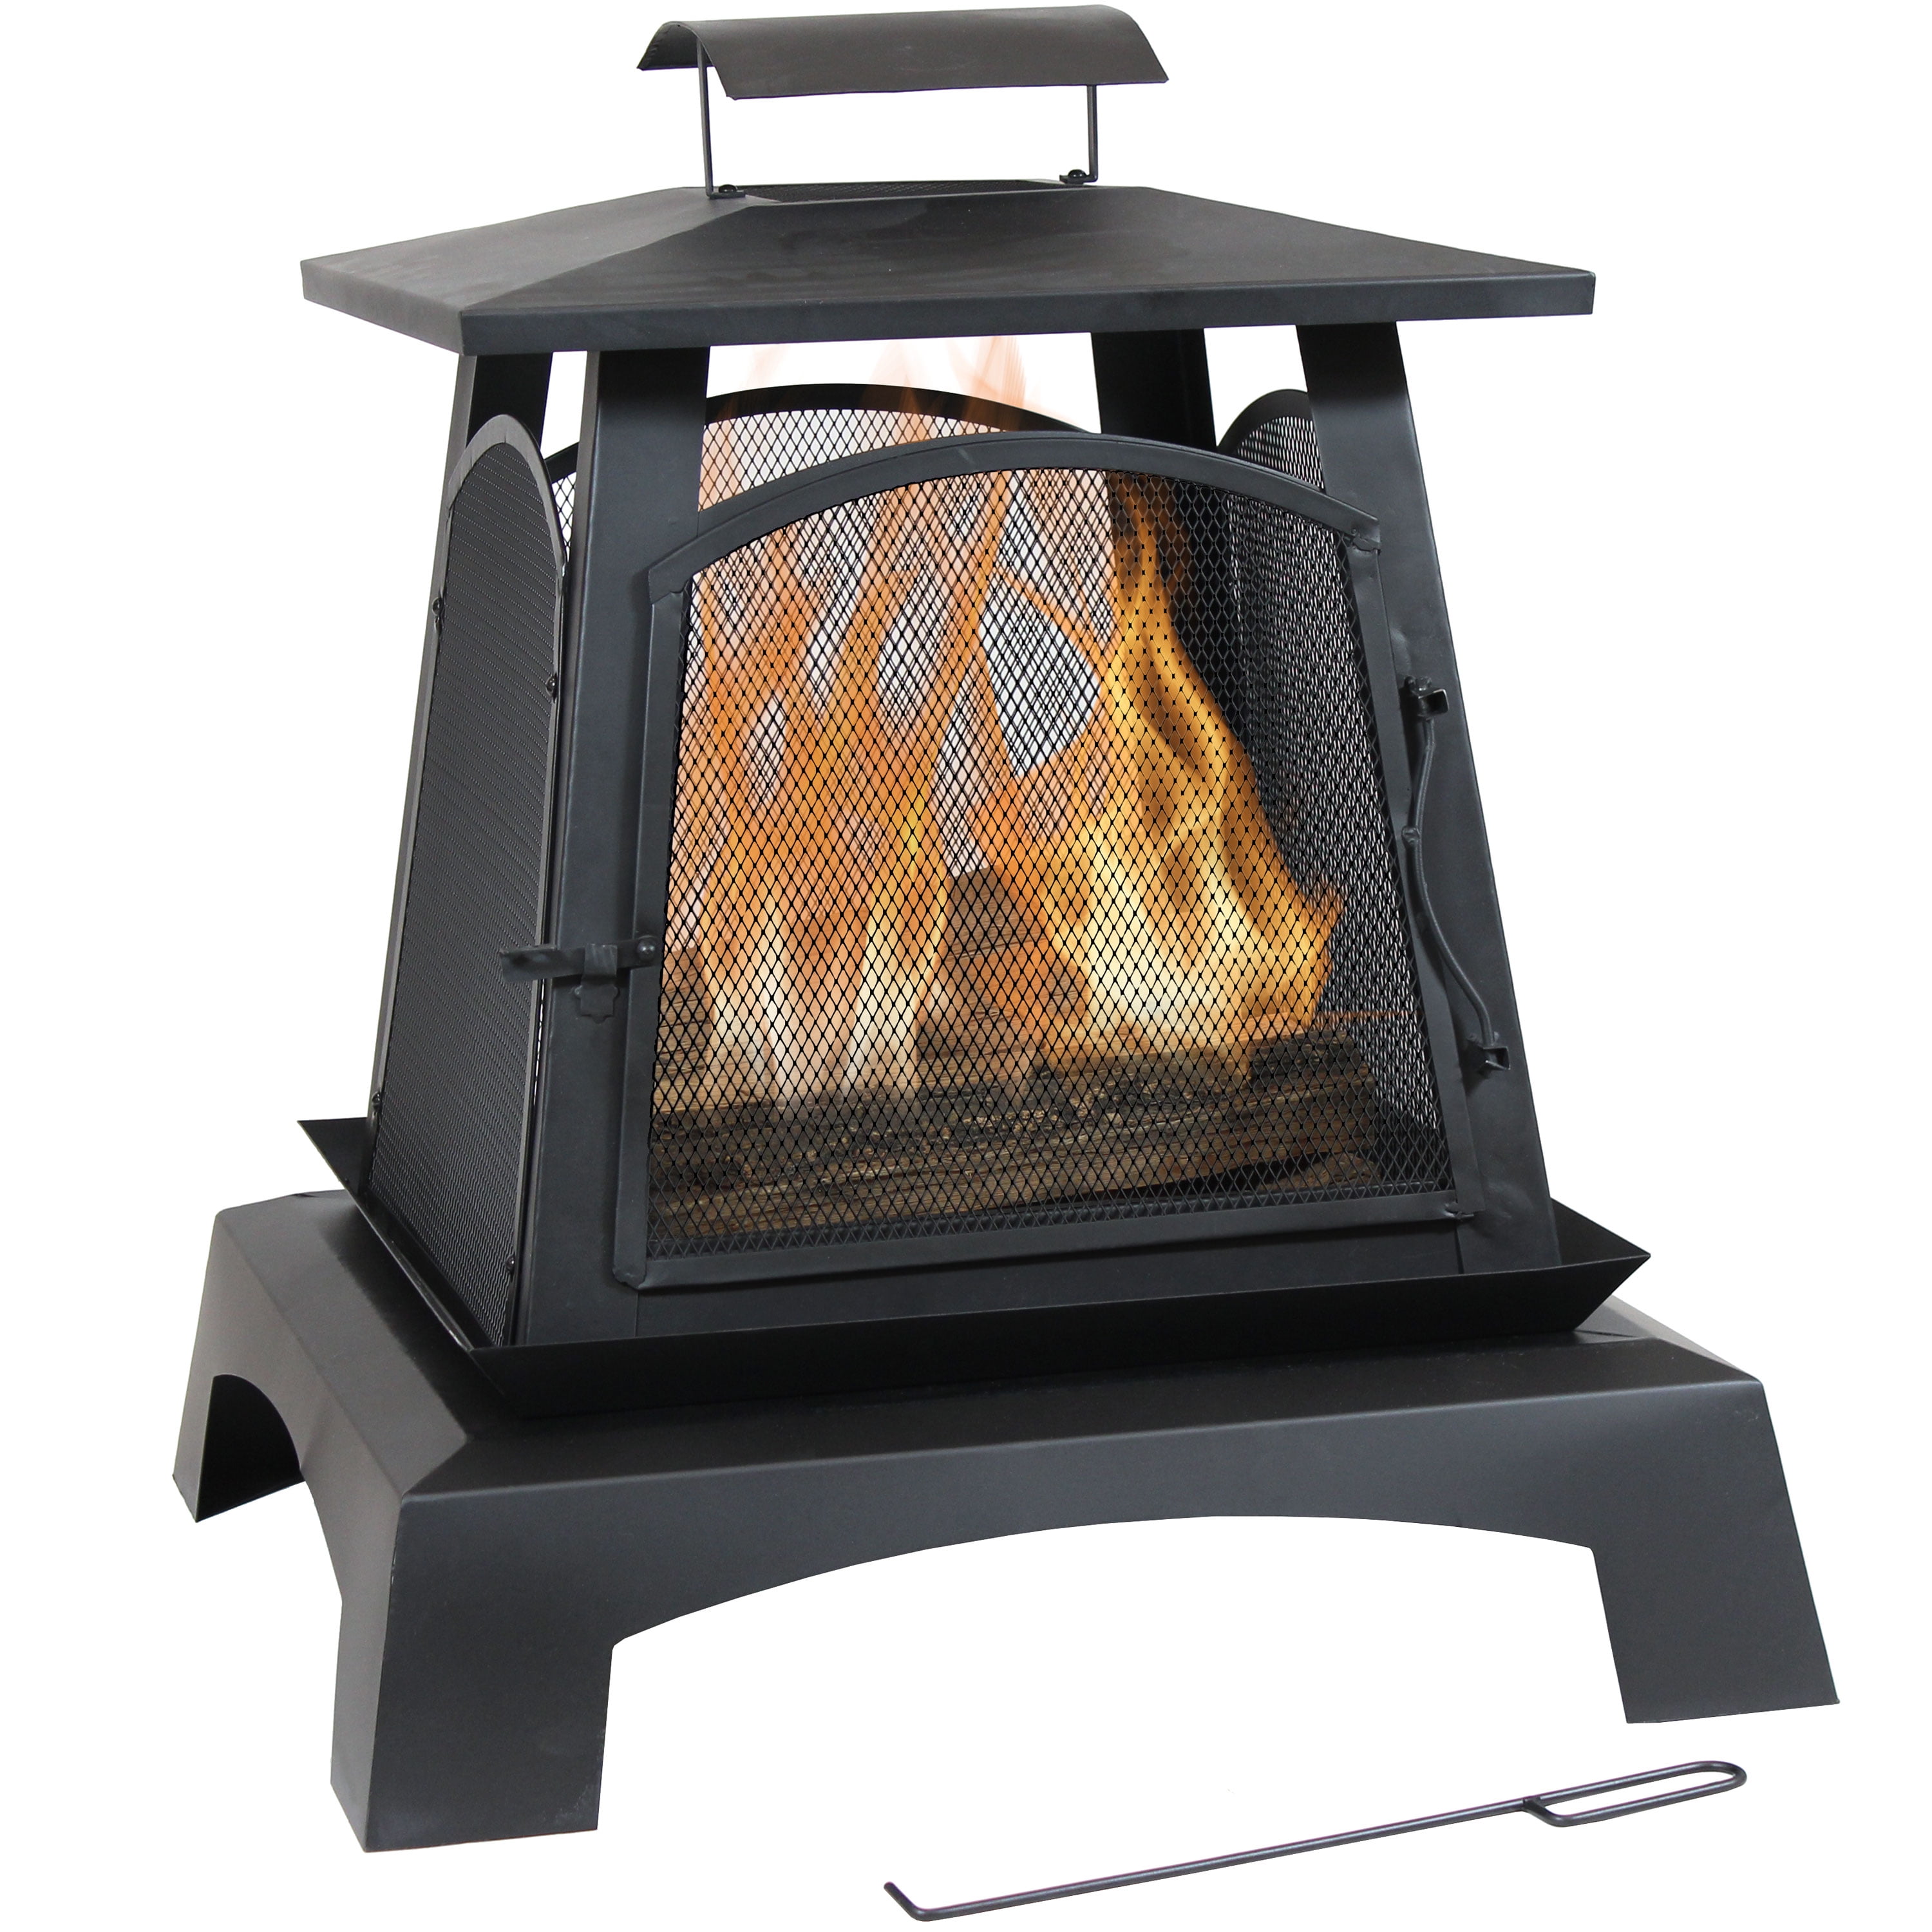 Tabletop Fireplace Bio-Ethanol Fire Pit, Indoor Outdoor Portable 